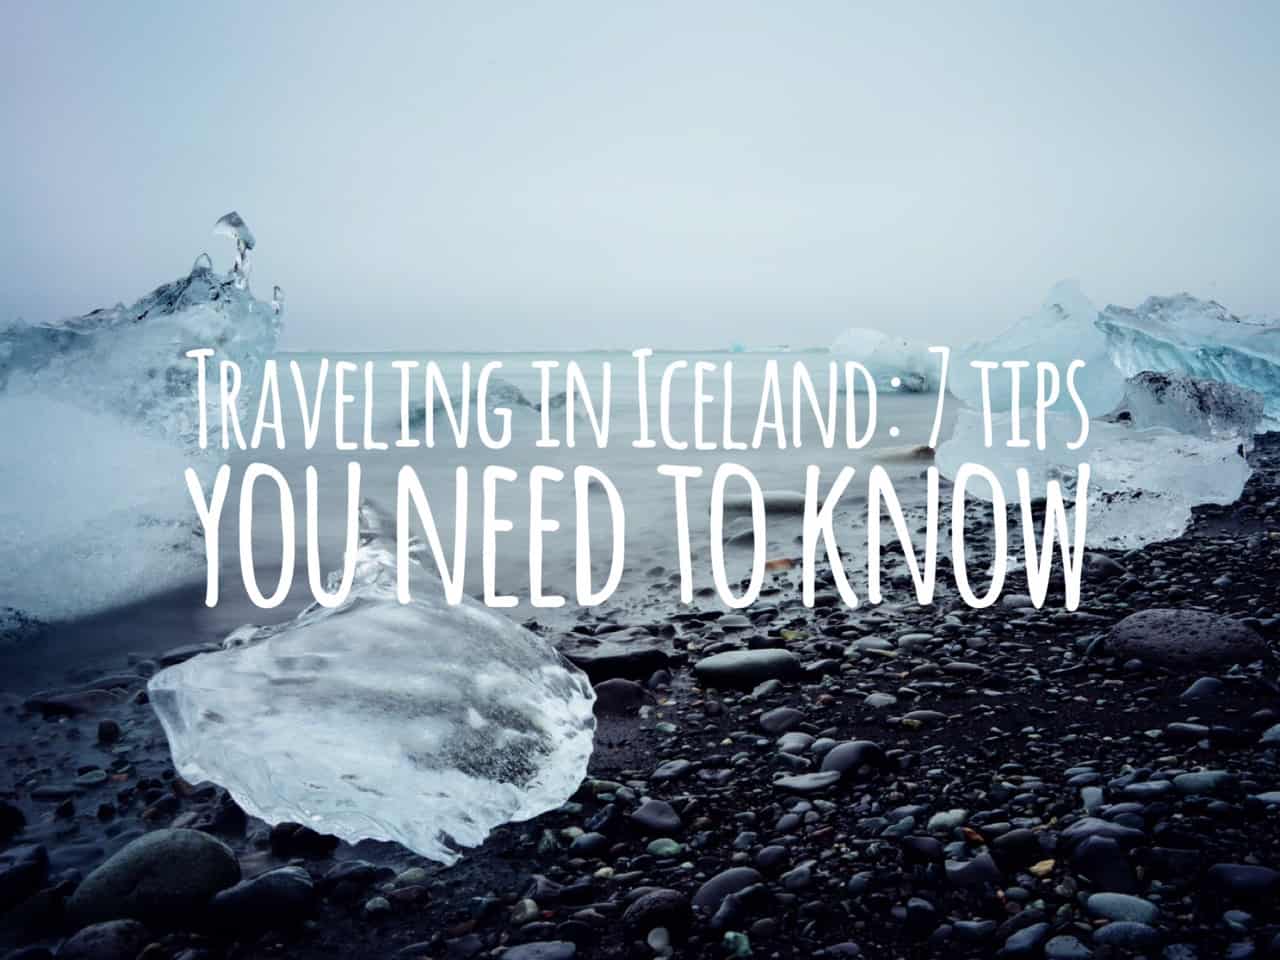 Tips for traveling to Iceland